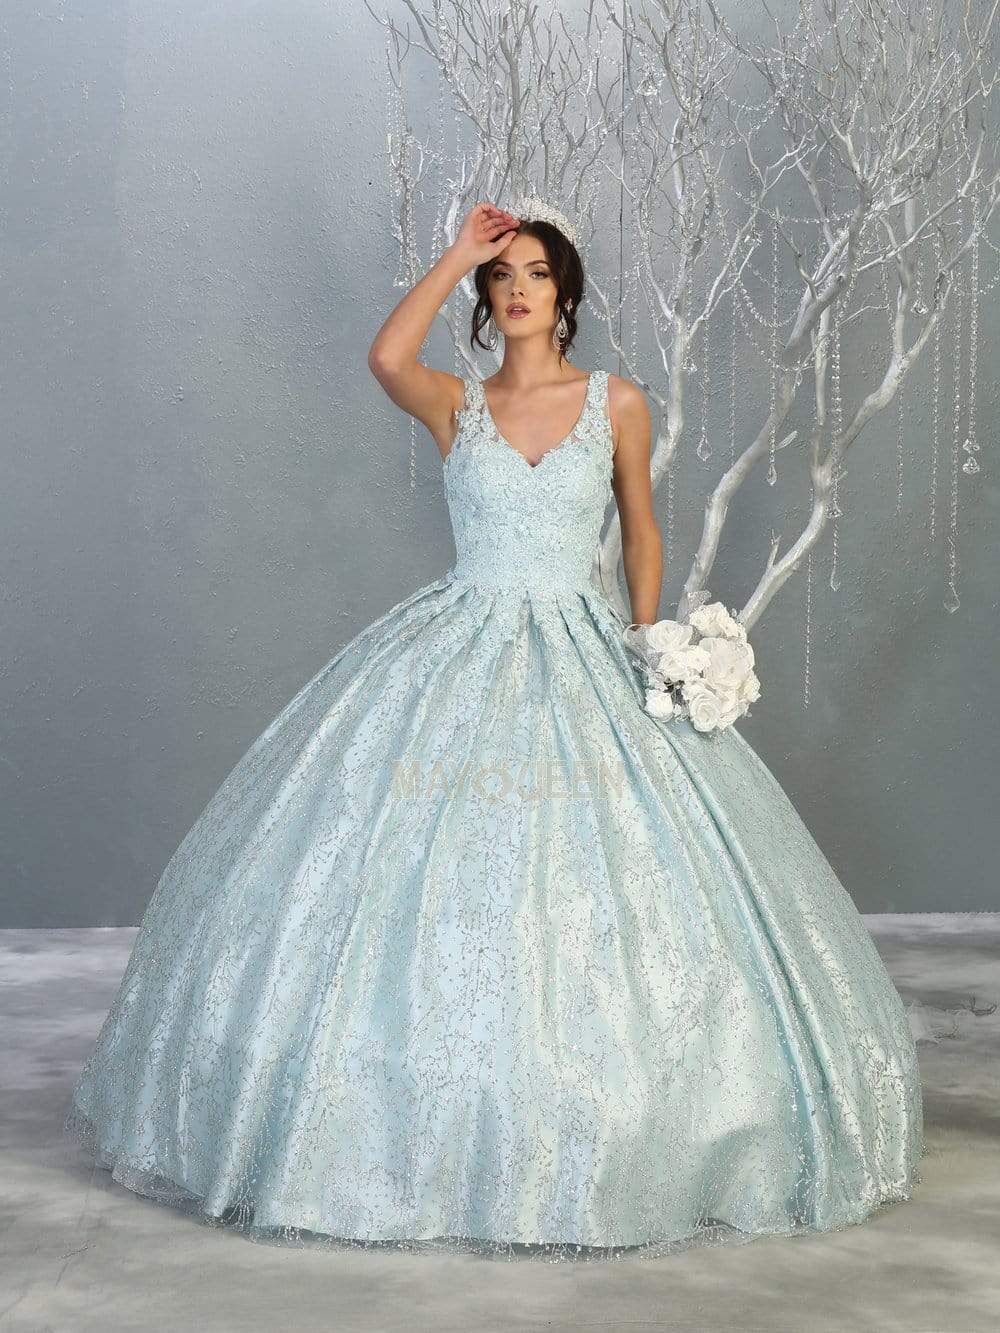 May Queen - LK149 Glitter Floral Appliqued Ballgown Quinceanera Dresses 2 / Baby-Blue